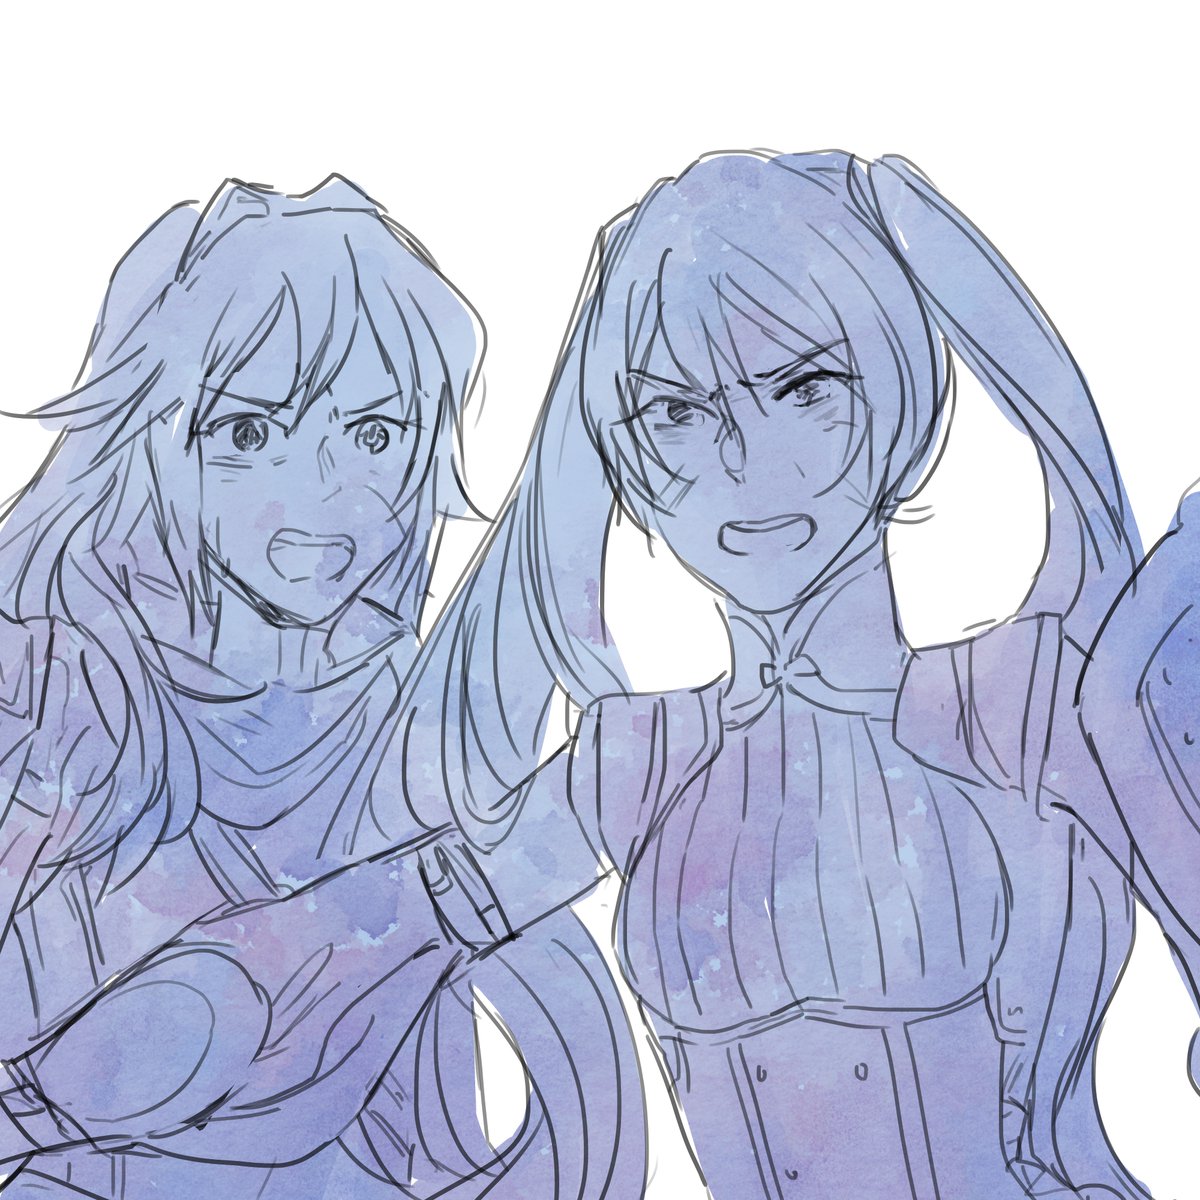 13. Lucina/Severa"I may not be a pegasus knight, but I can still share in their duty. I can still protect you!"